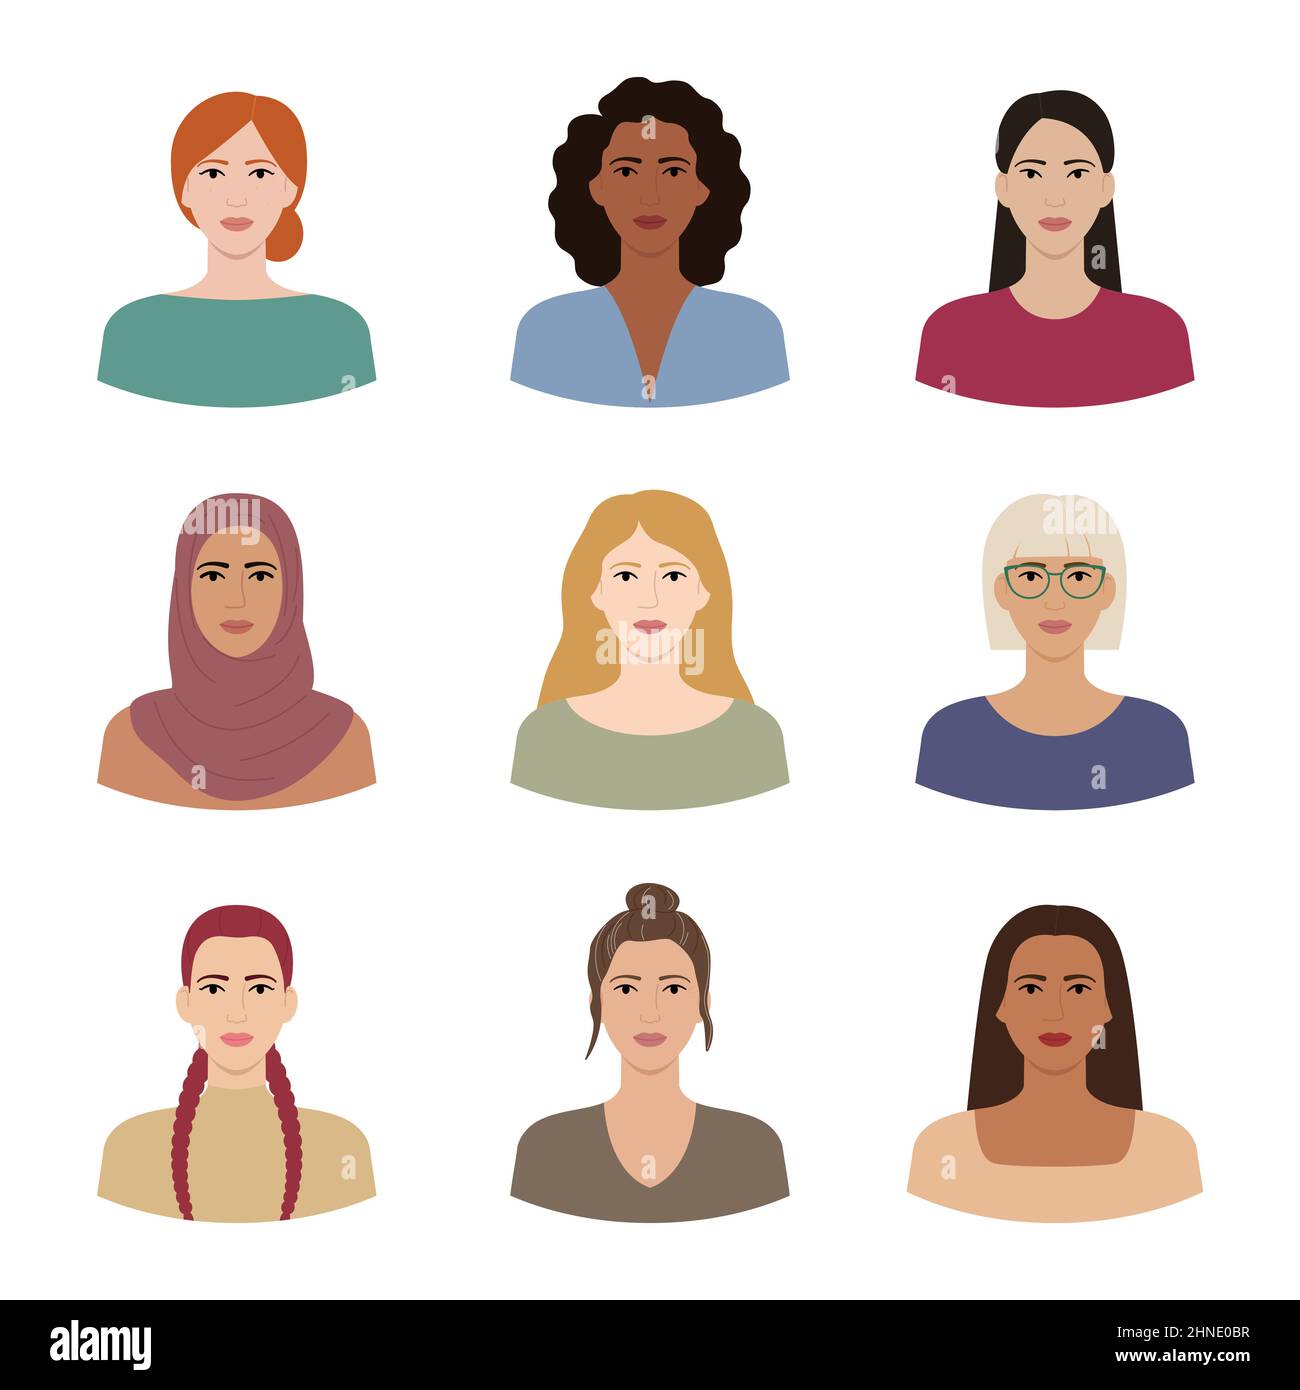 Set of women with different hairstyles, skin colors, races, ages. Diverse portraits of smiling women isolated on white background. Variations of femal Stock Vector